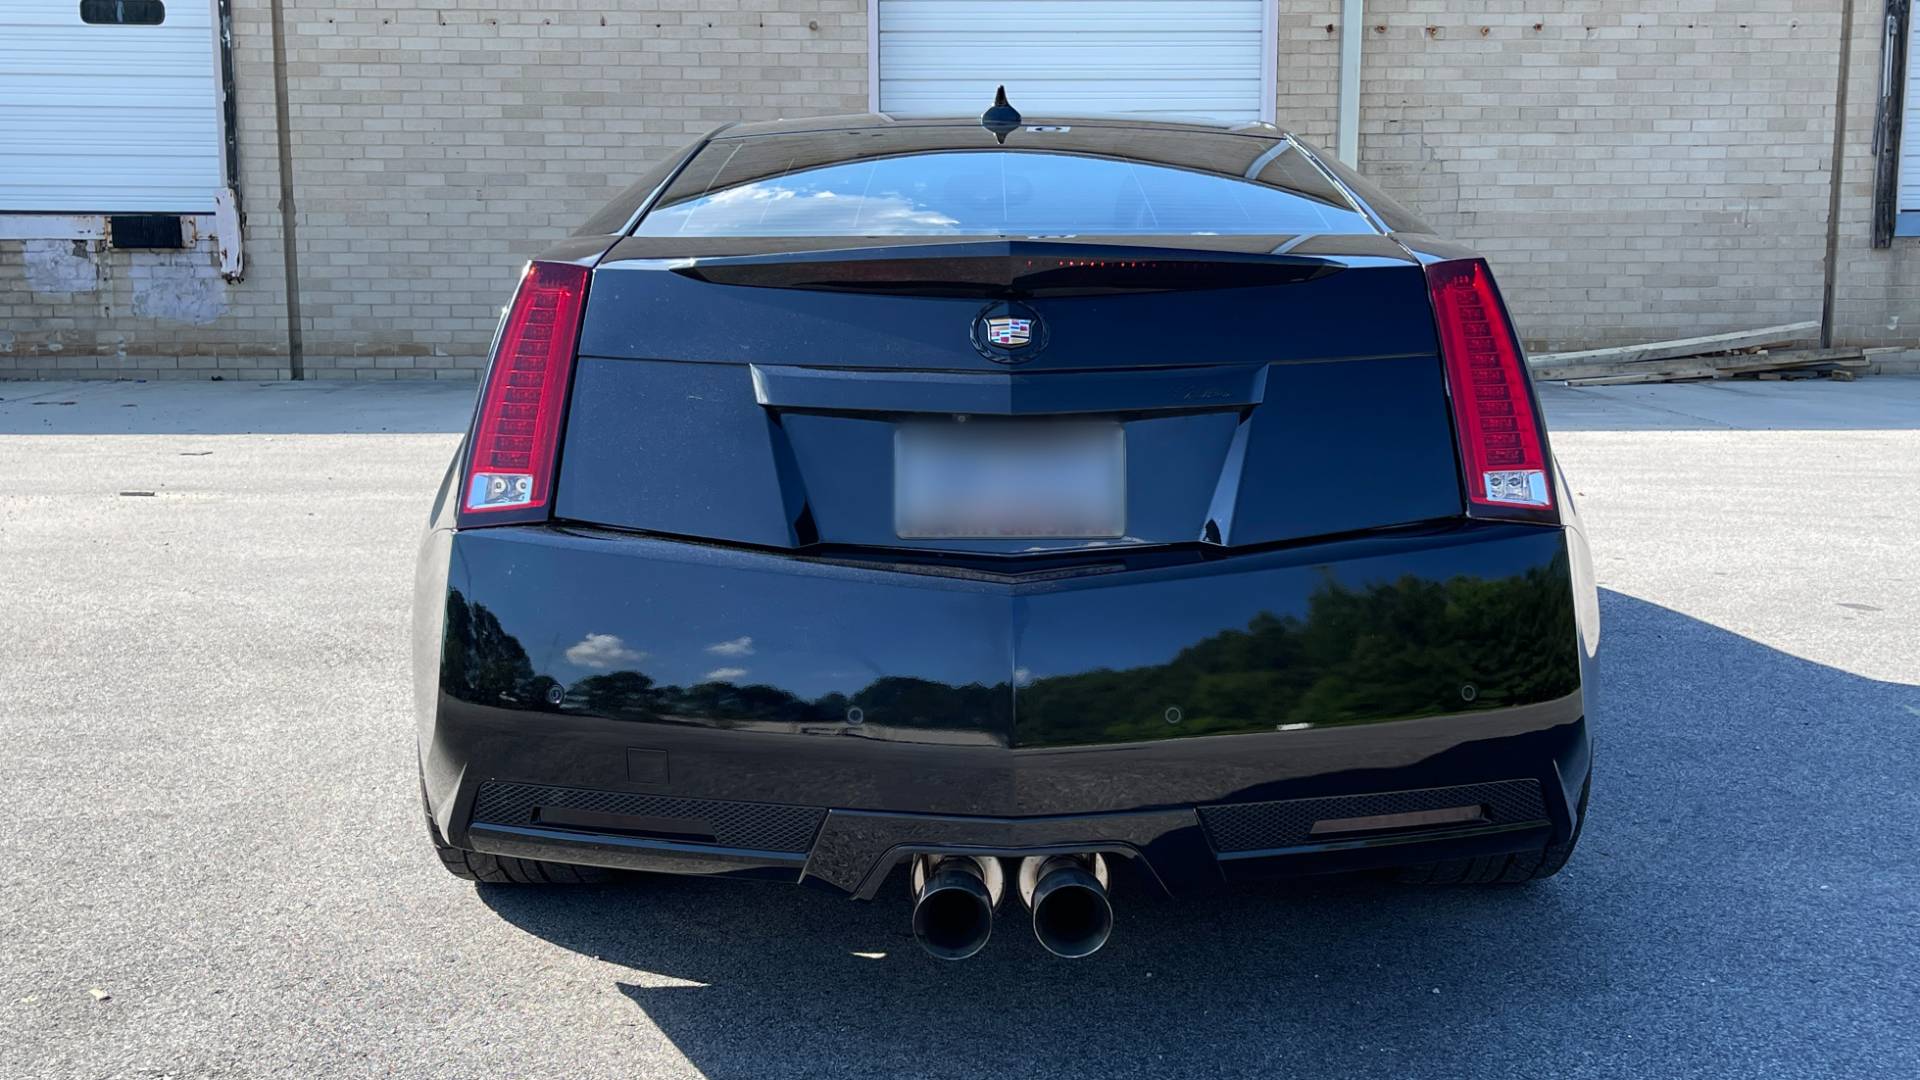 Used 2011 Cadillac CTS-V COUPE 6.2L 600HP+ / NAV / BOSE / SUNROOF / RECARO / 19IN WHLS / REARVIEW for sale $39,995 at Formula Imports in Charlotte NC 28227 11